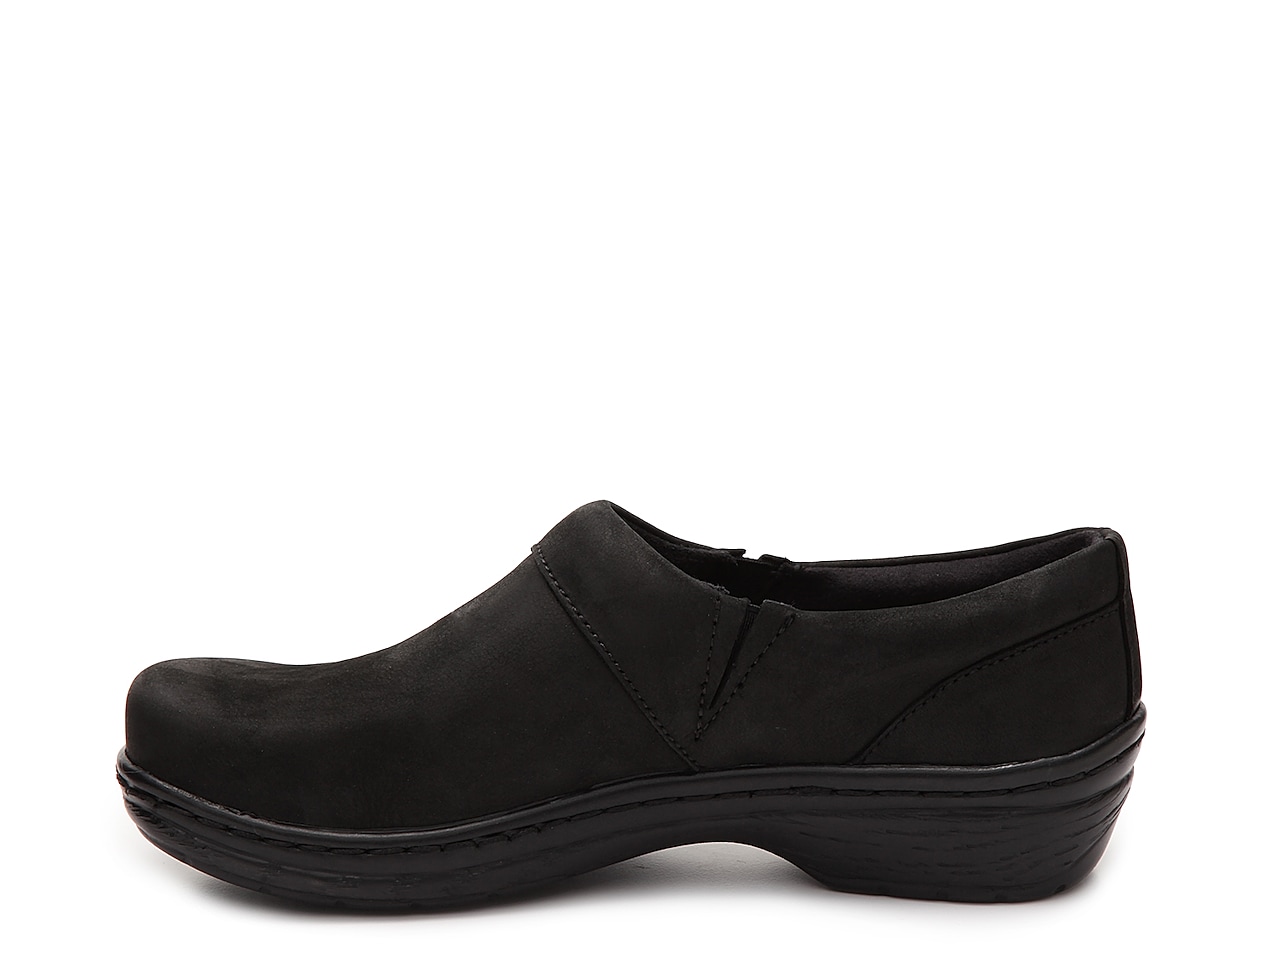 Klogs Mission Work Clog Women's Shoes | DSW